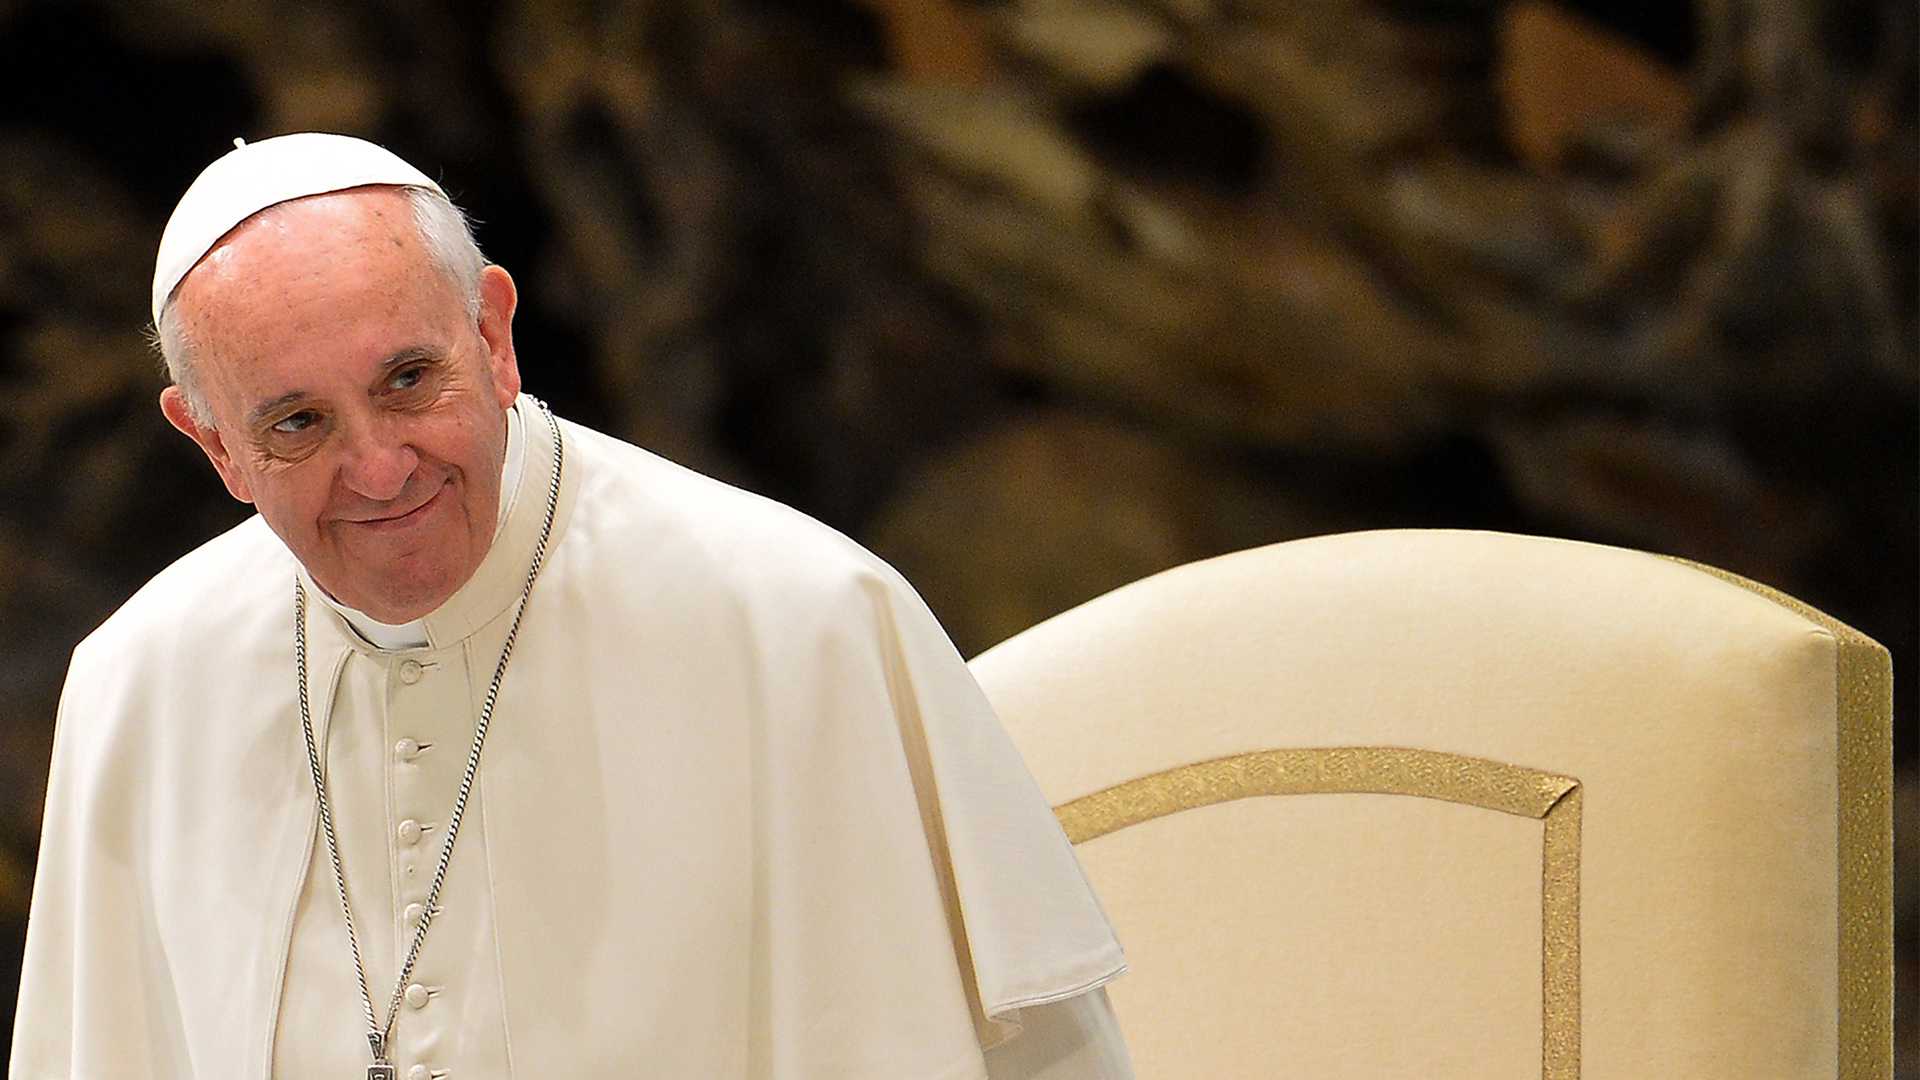 The pope and the pews: Match made? Washington Post